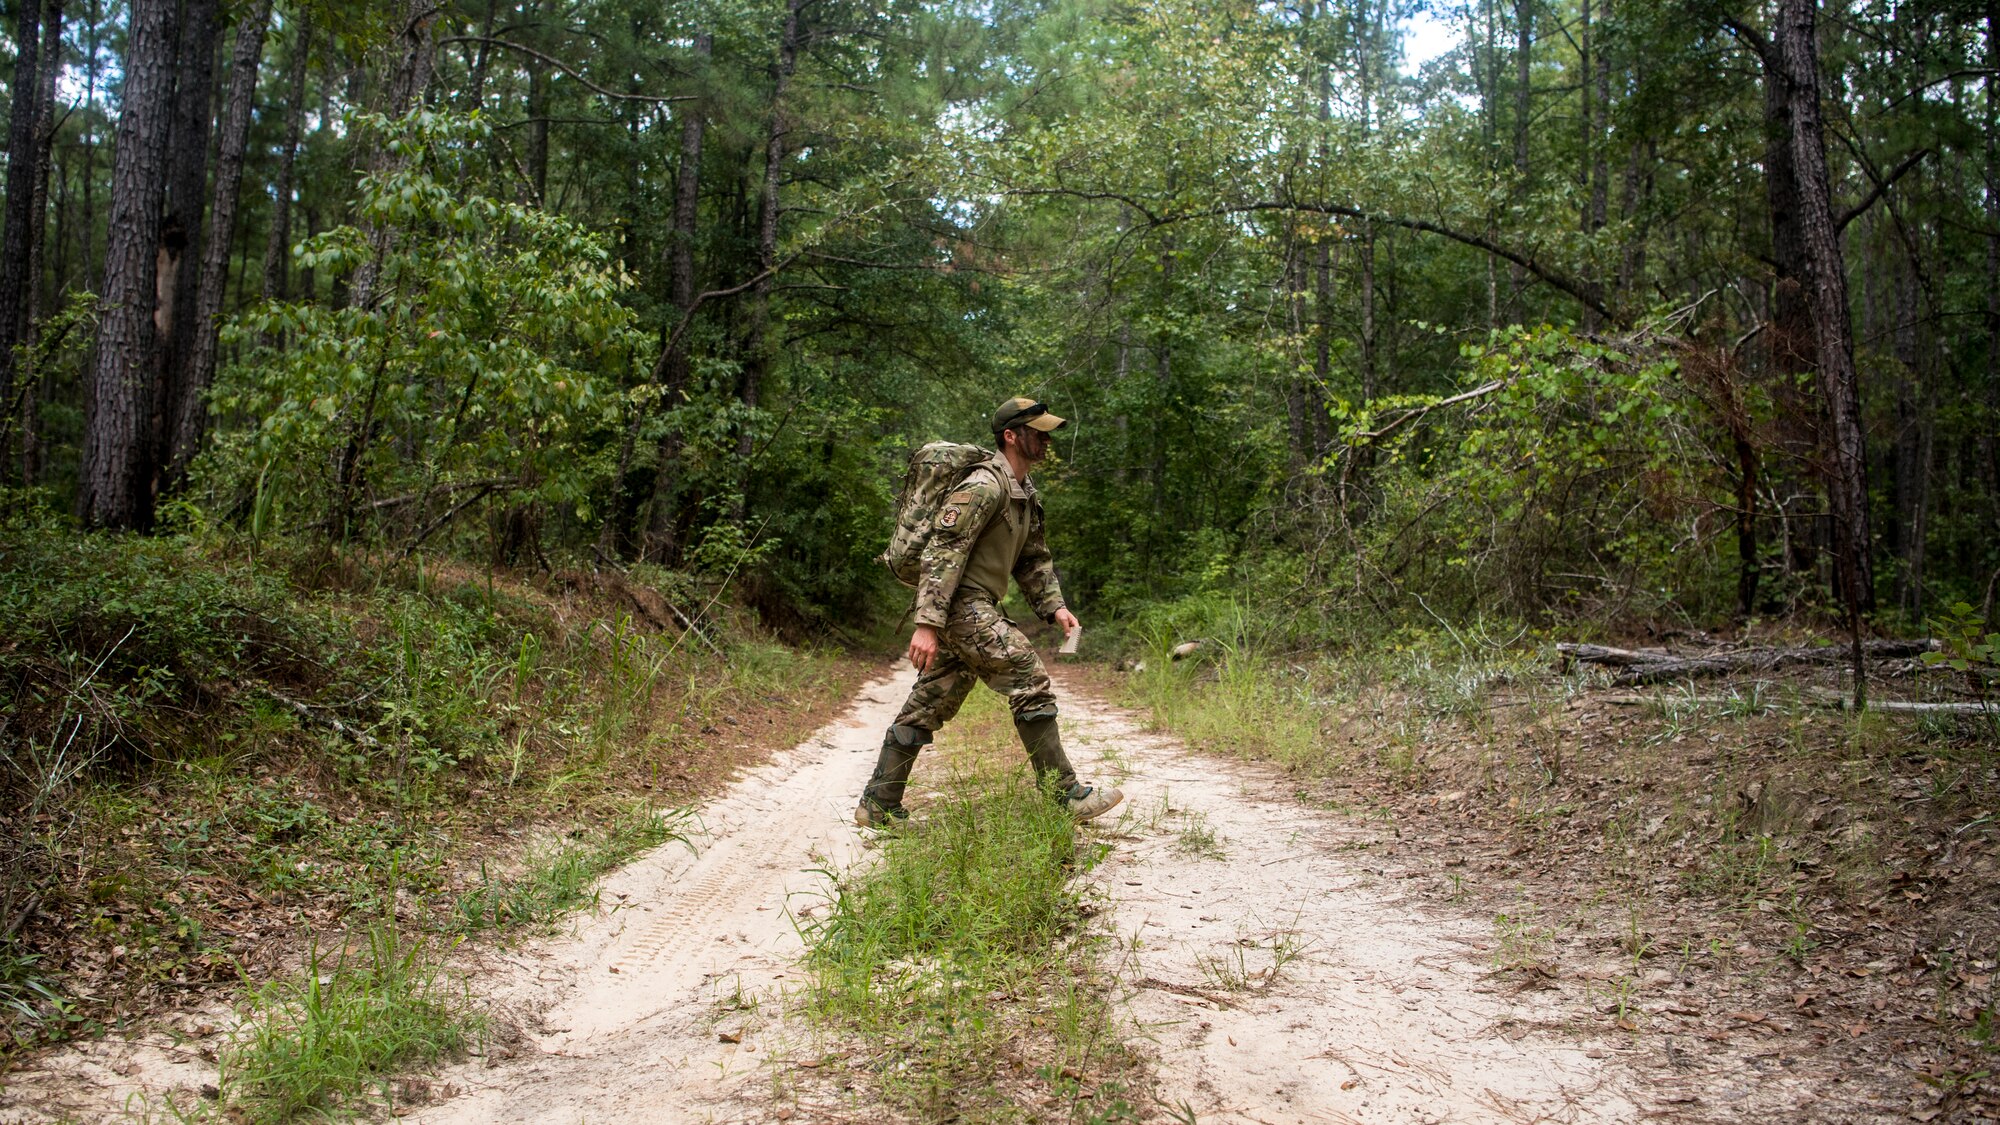 A Survival, Evasion, Resistance and Escape Specialist assigned to the 437th Operations Support Squadron walks across a dirt road during a survival, evasion, resistance, and escape exercise August 21, 2019 in North, South Carolina. SERE specialists assigned to the 437th Operations Support Squadron conducted this exercise in order to identify potential areas of improvement in both SERE training and equipment provided to aircrew in case of a potential isolating event. (U.S. Air Force photo/Airman 1st Class Duncan C. Bevan)